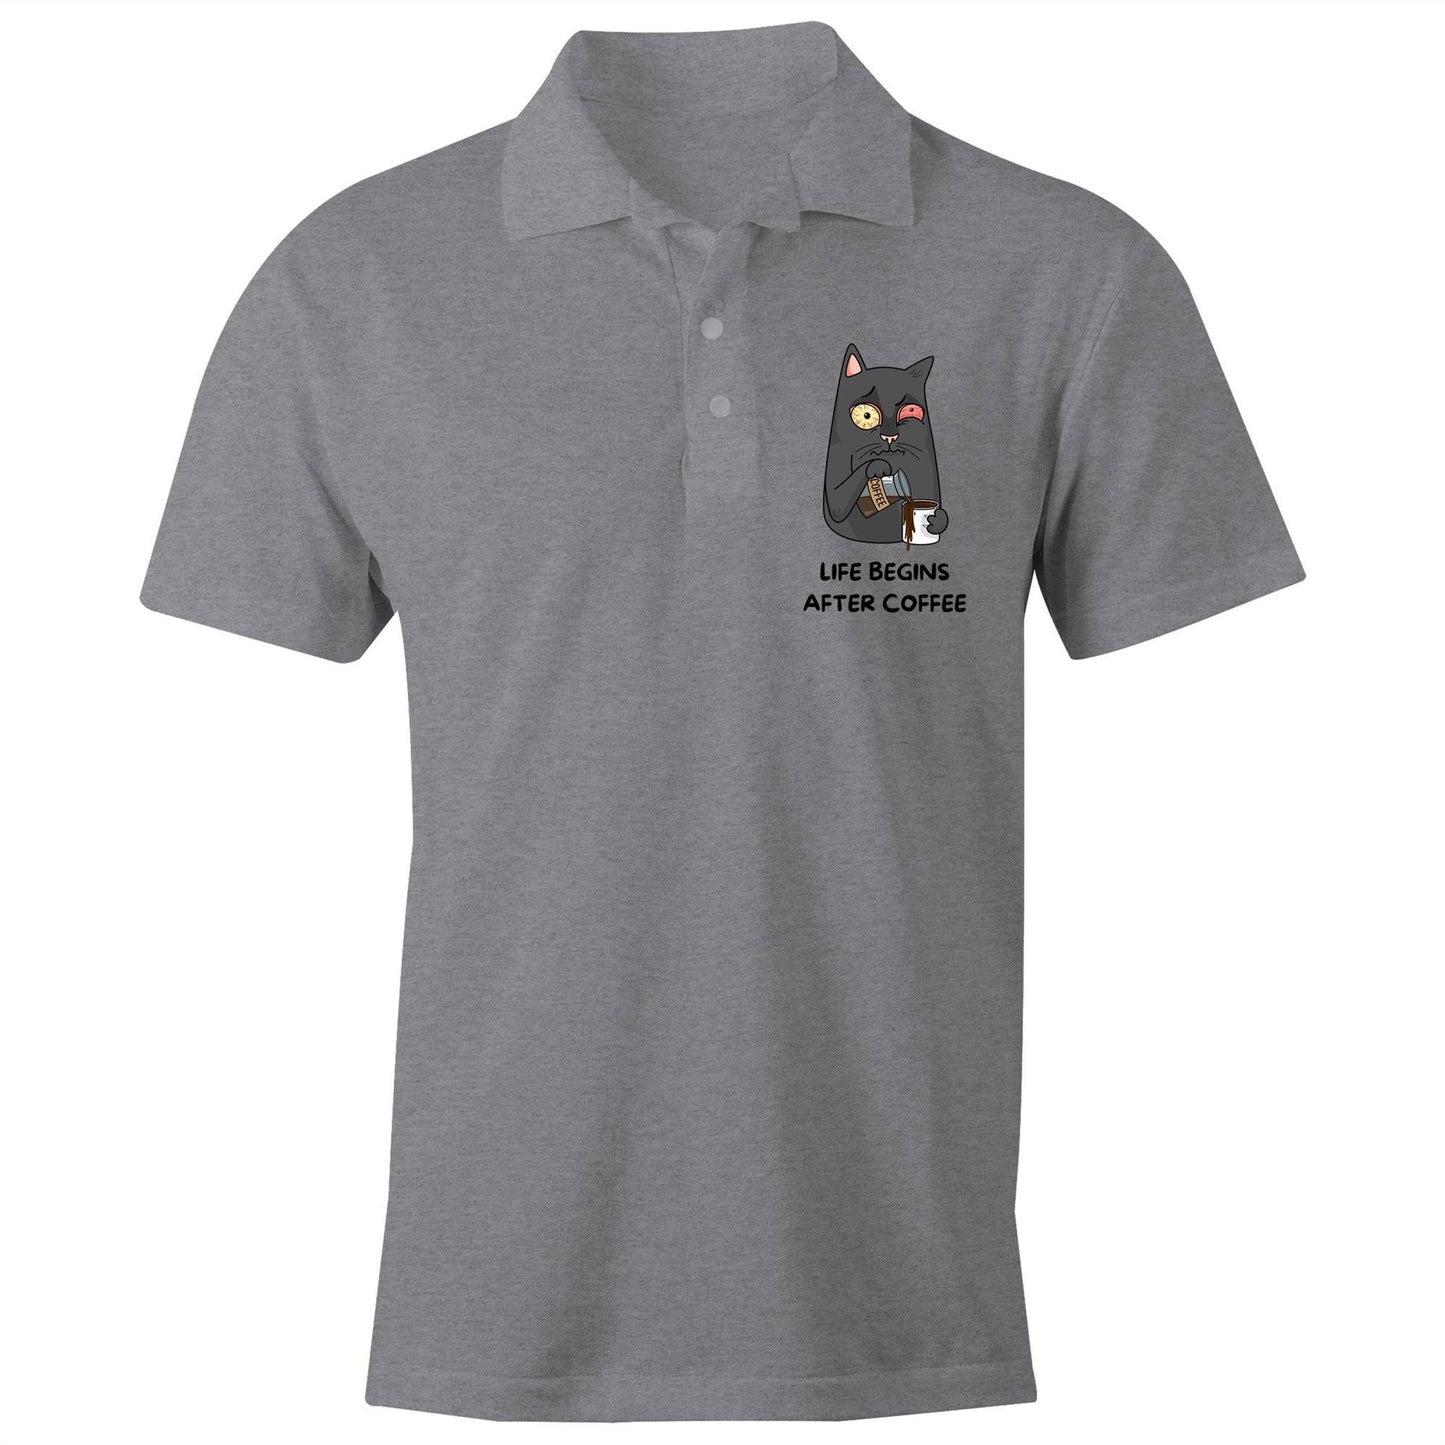 Cat, Life Begins After Coffee - Chad S/S Polo Shirt, Printed Grey Marle Polo Shirt Coffee Funny